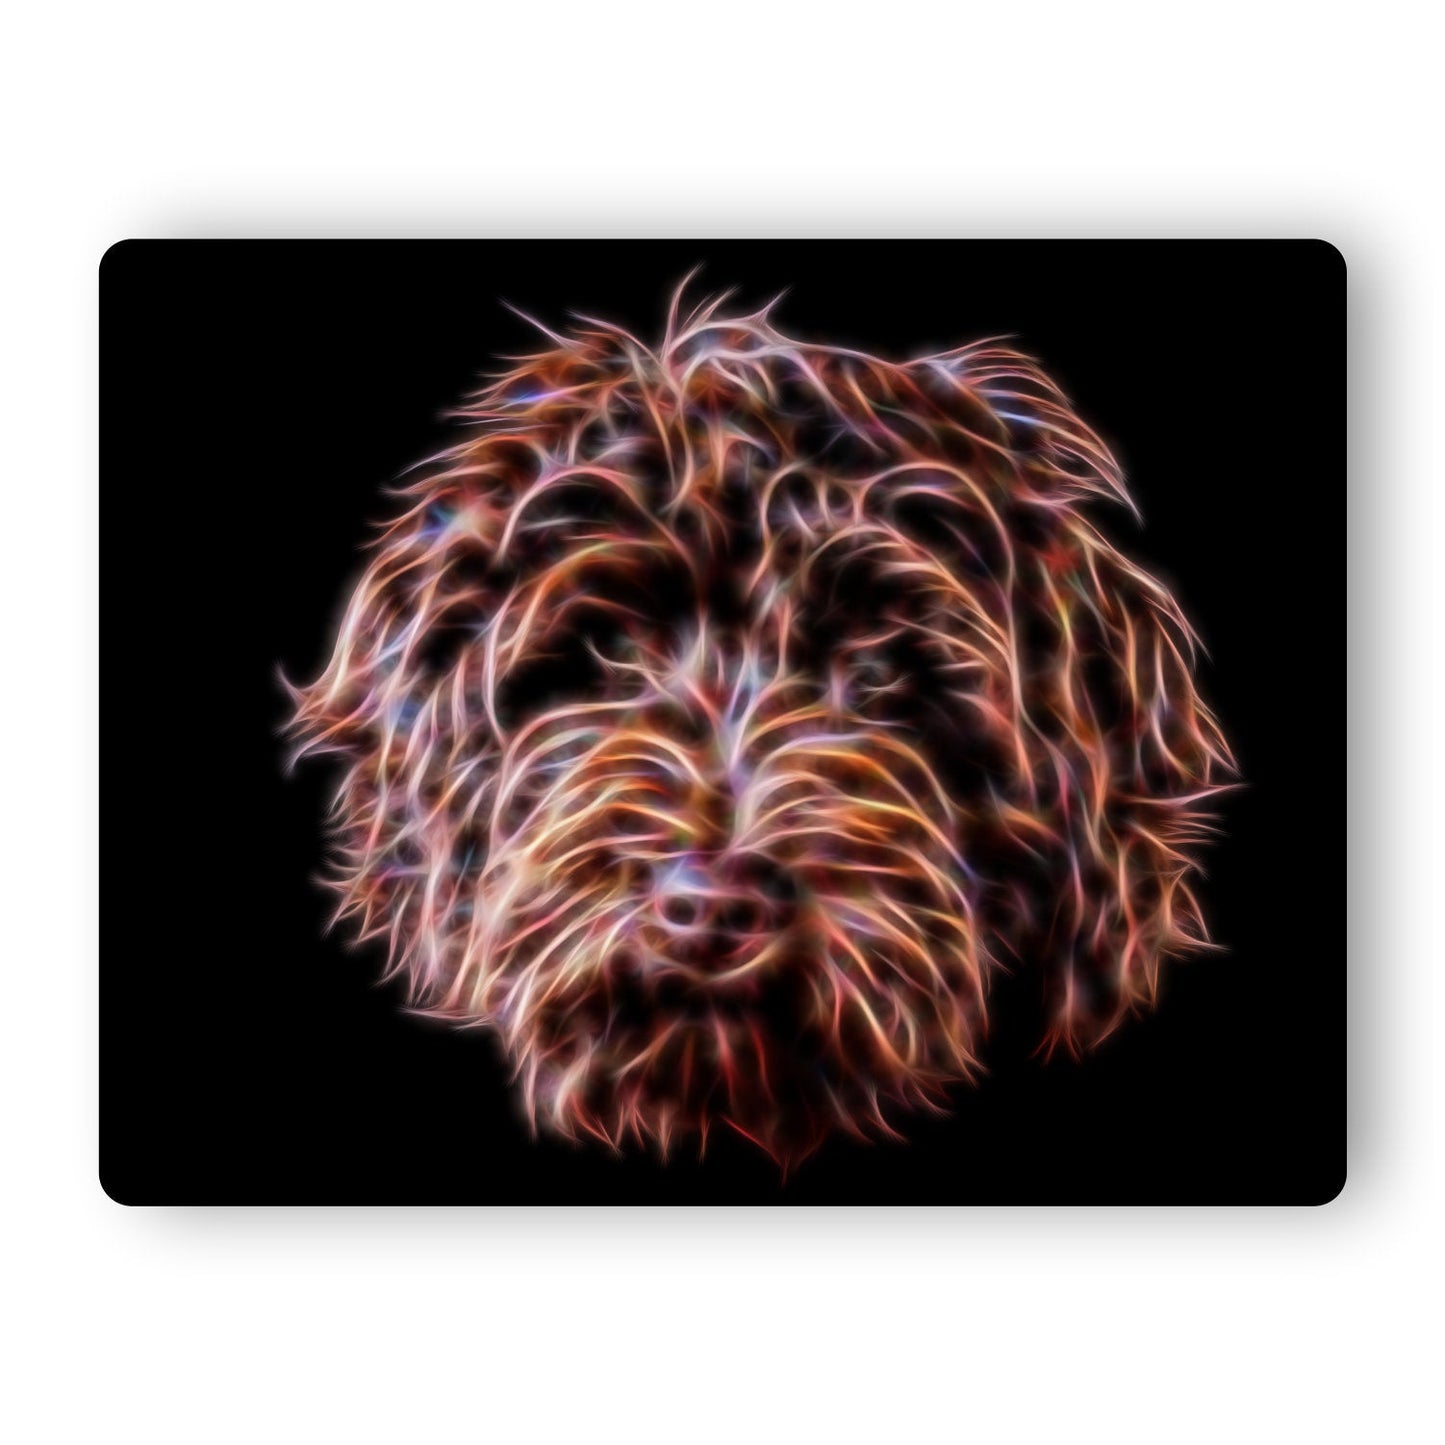 Chocolate Labradoodle Metal Wall Plaque. Also available as Keychain or Coaster.